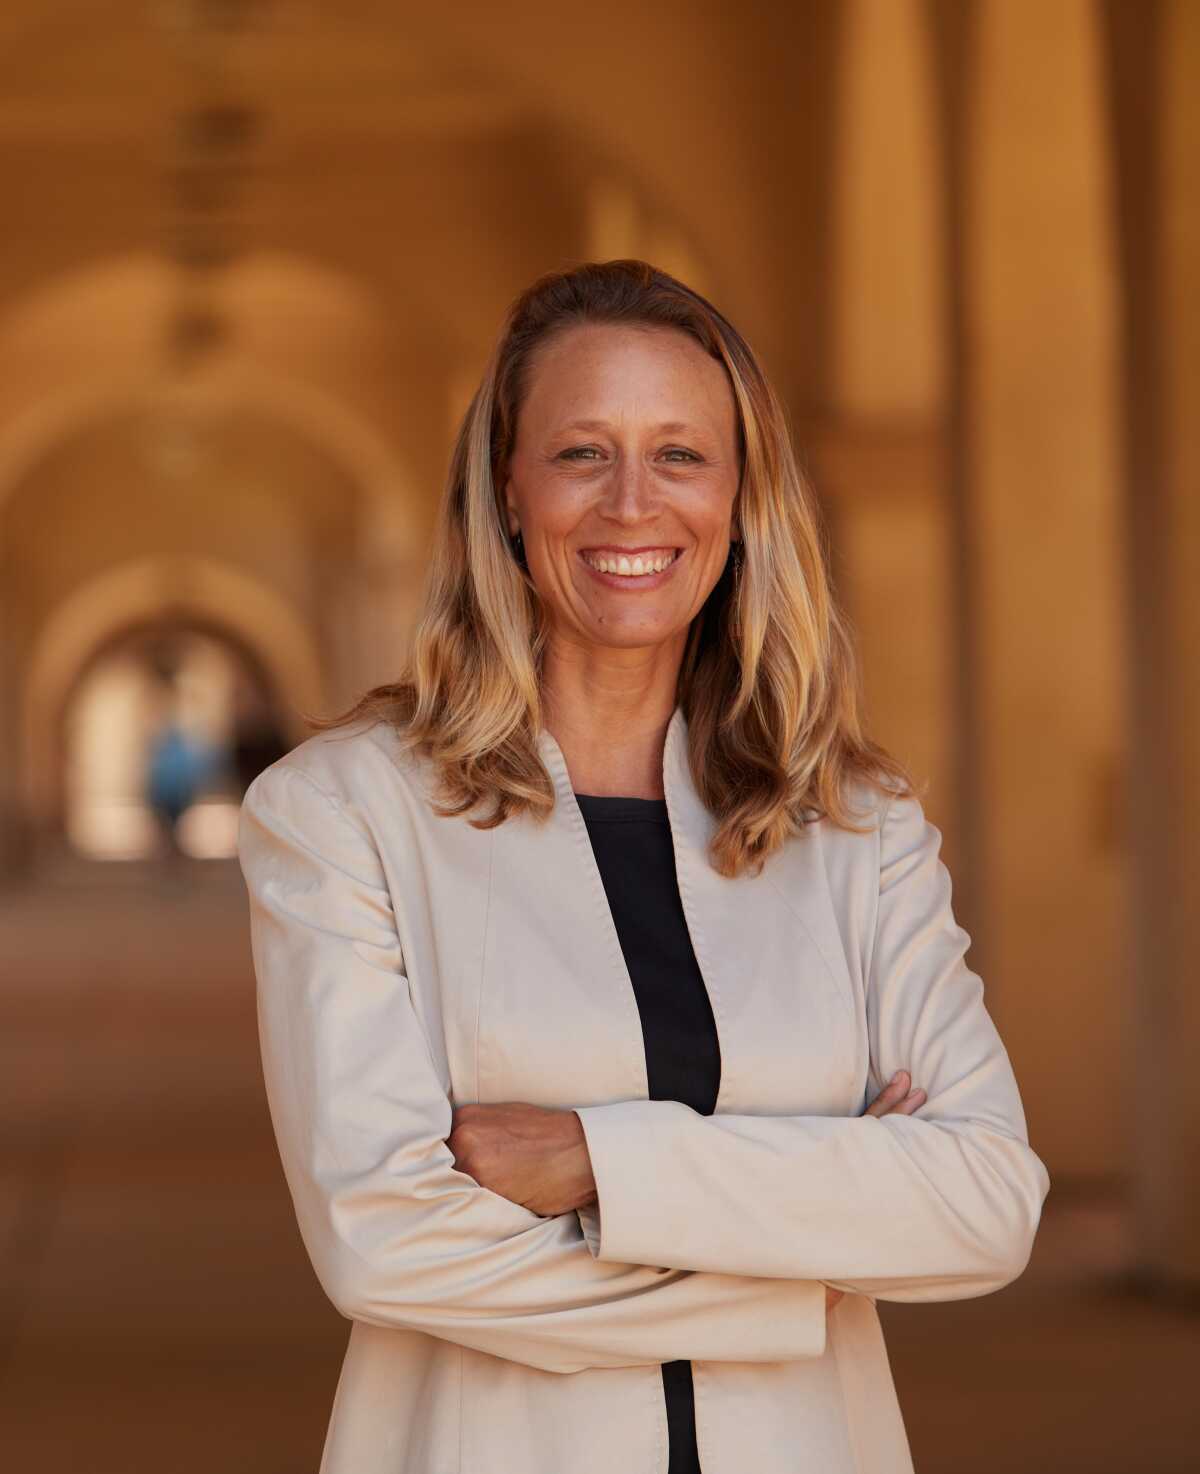 The La Jolla Community Center presents San Diego County Supervisor Terra Lawson-Remer at 6 p.m. Tuesday, March 29, online.